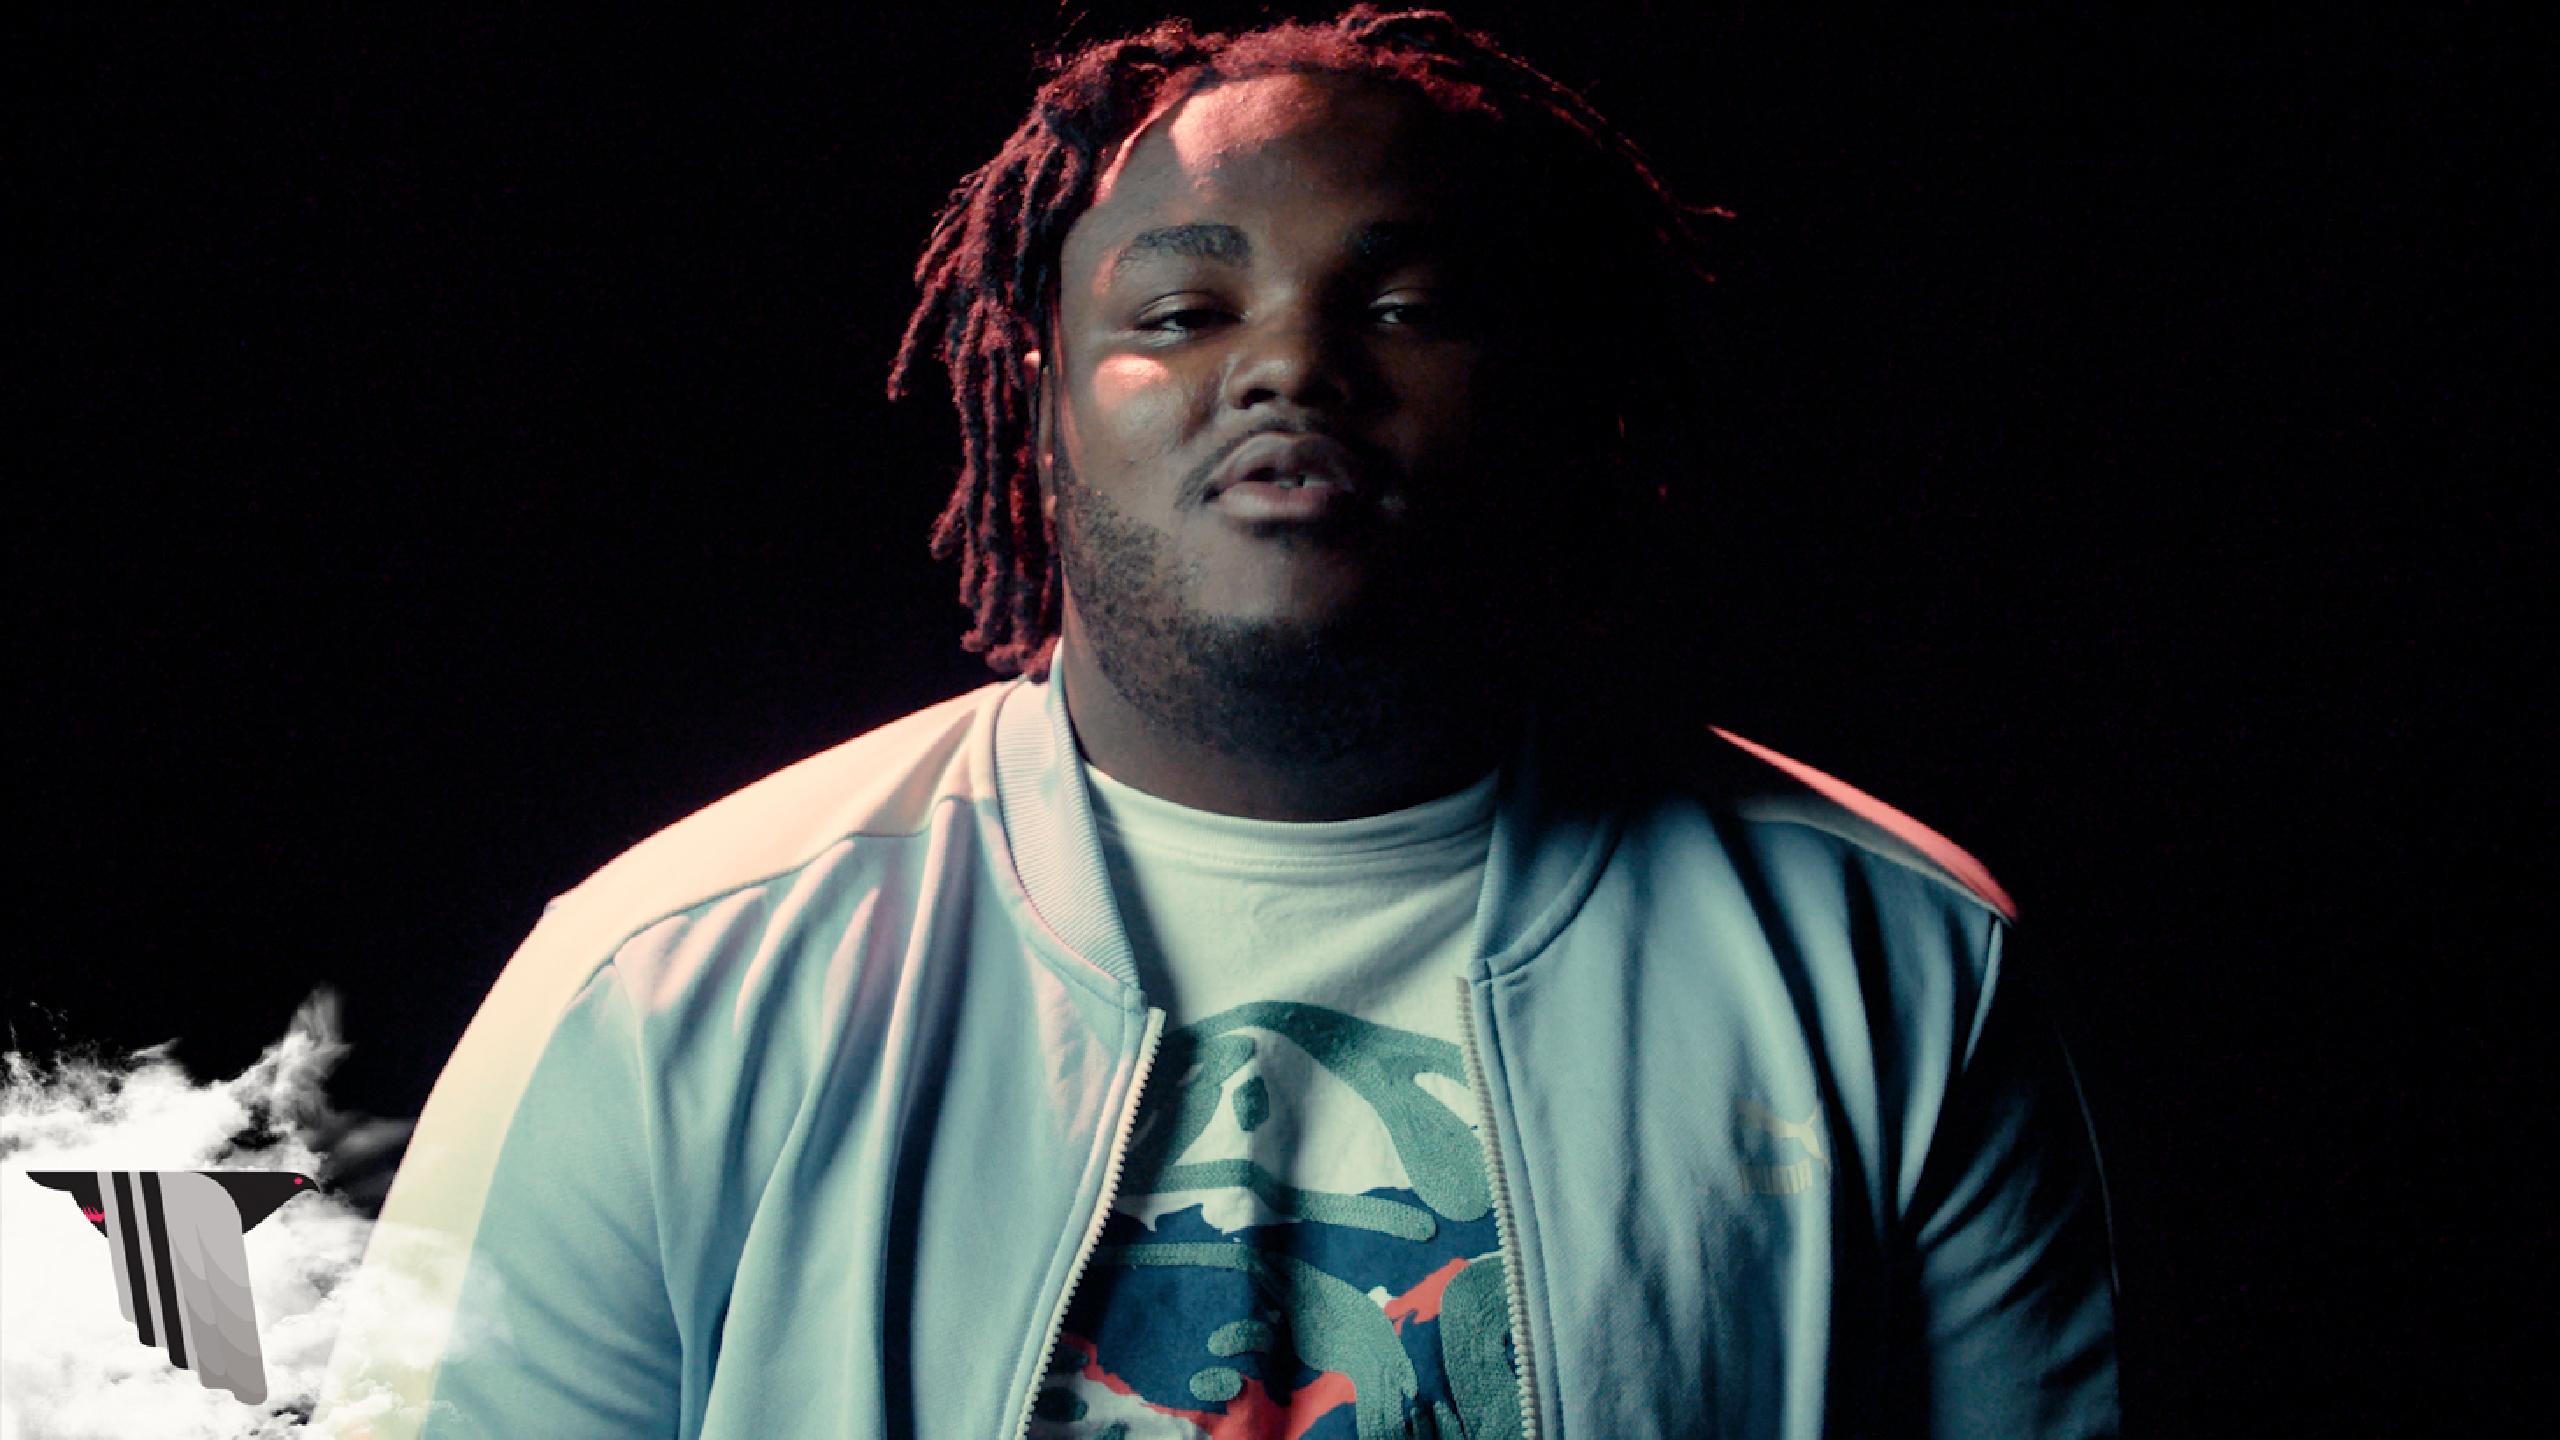 Feel himself. Tee Grizzly. Tee Grizzly Rapper. Tee Grizzley inst. Tee Grizzly Rapper detority.